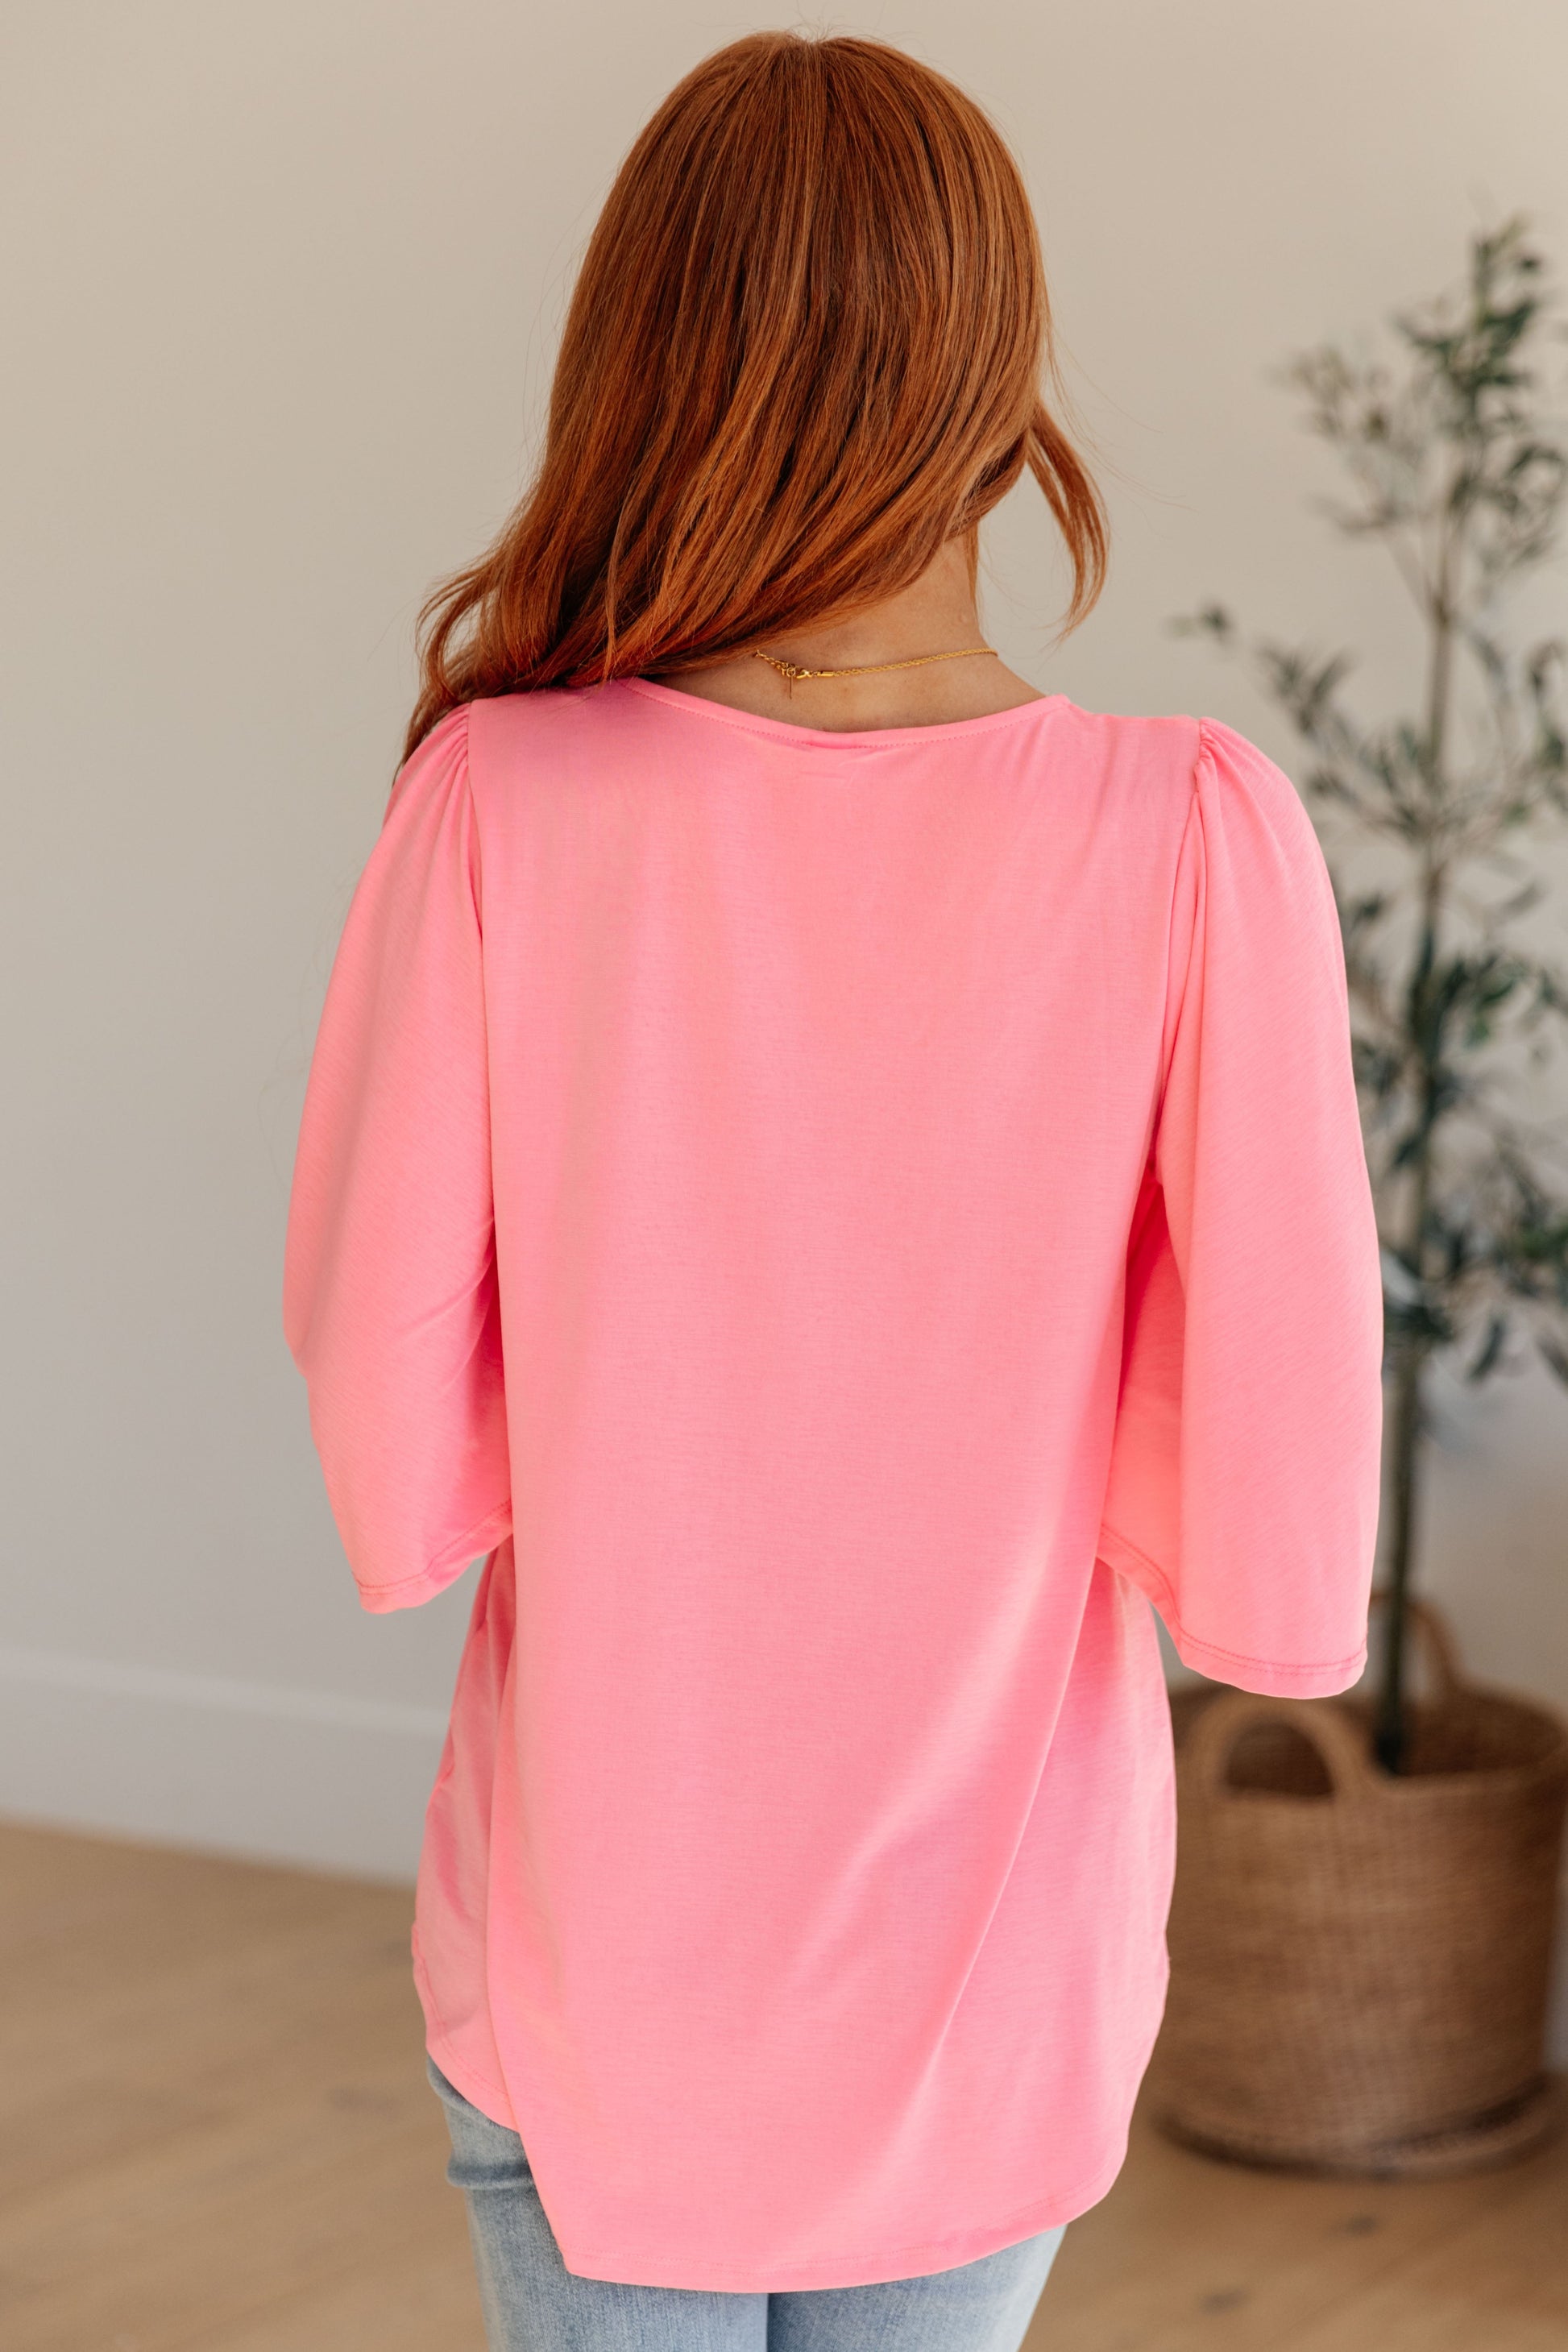 Cali Blouse in Neon Pink - Womens